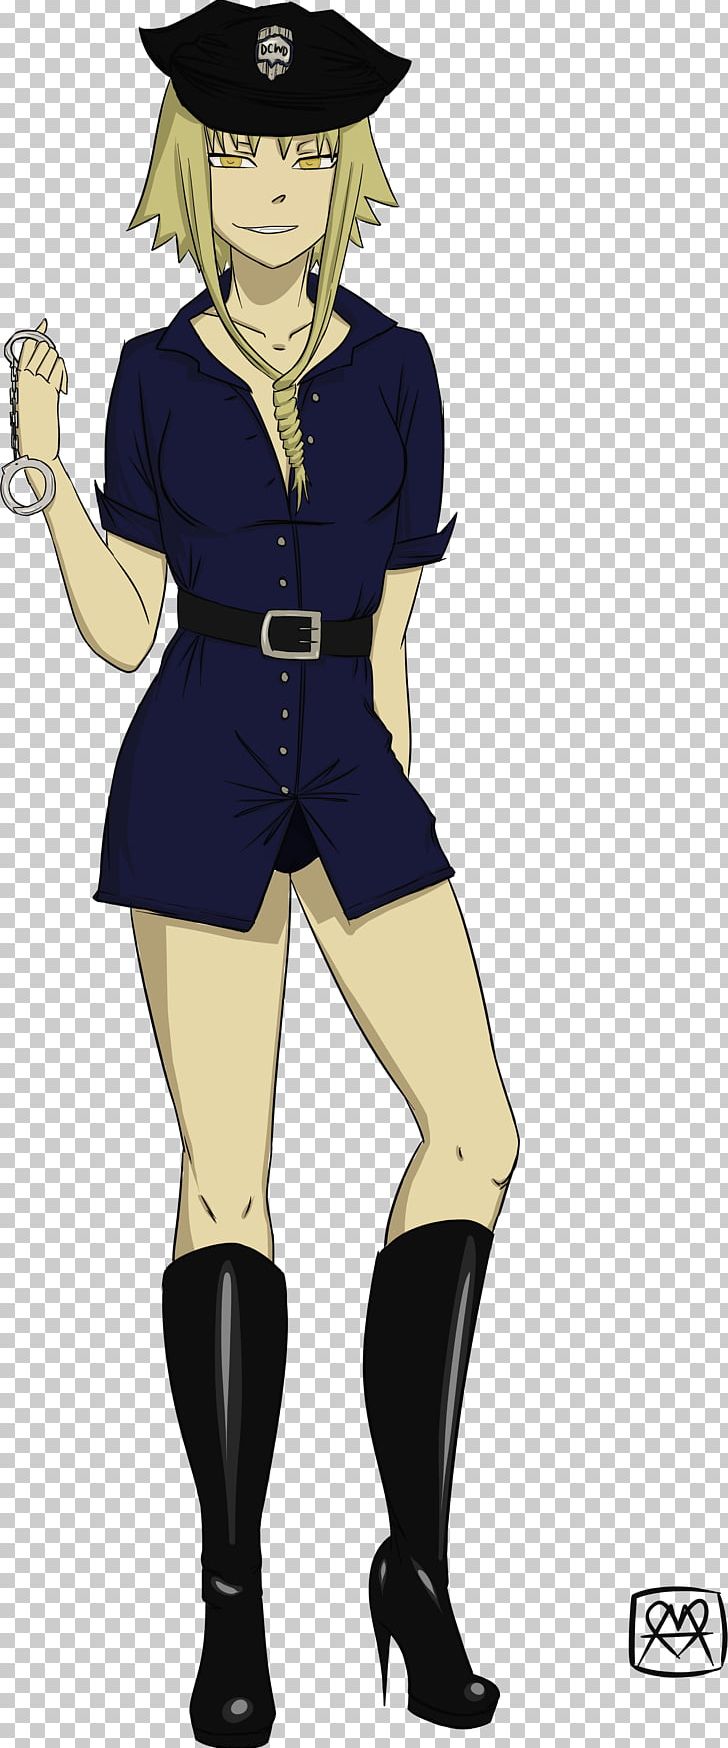 Police Officer Uniform Cosplay Medusa PNG, Clipart, Anime, Black Hair, Cartoon, Character, Cosplay Free PNG Download